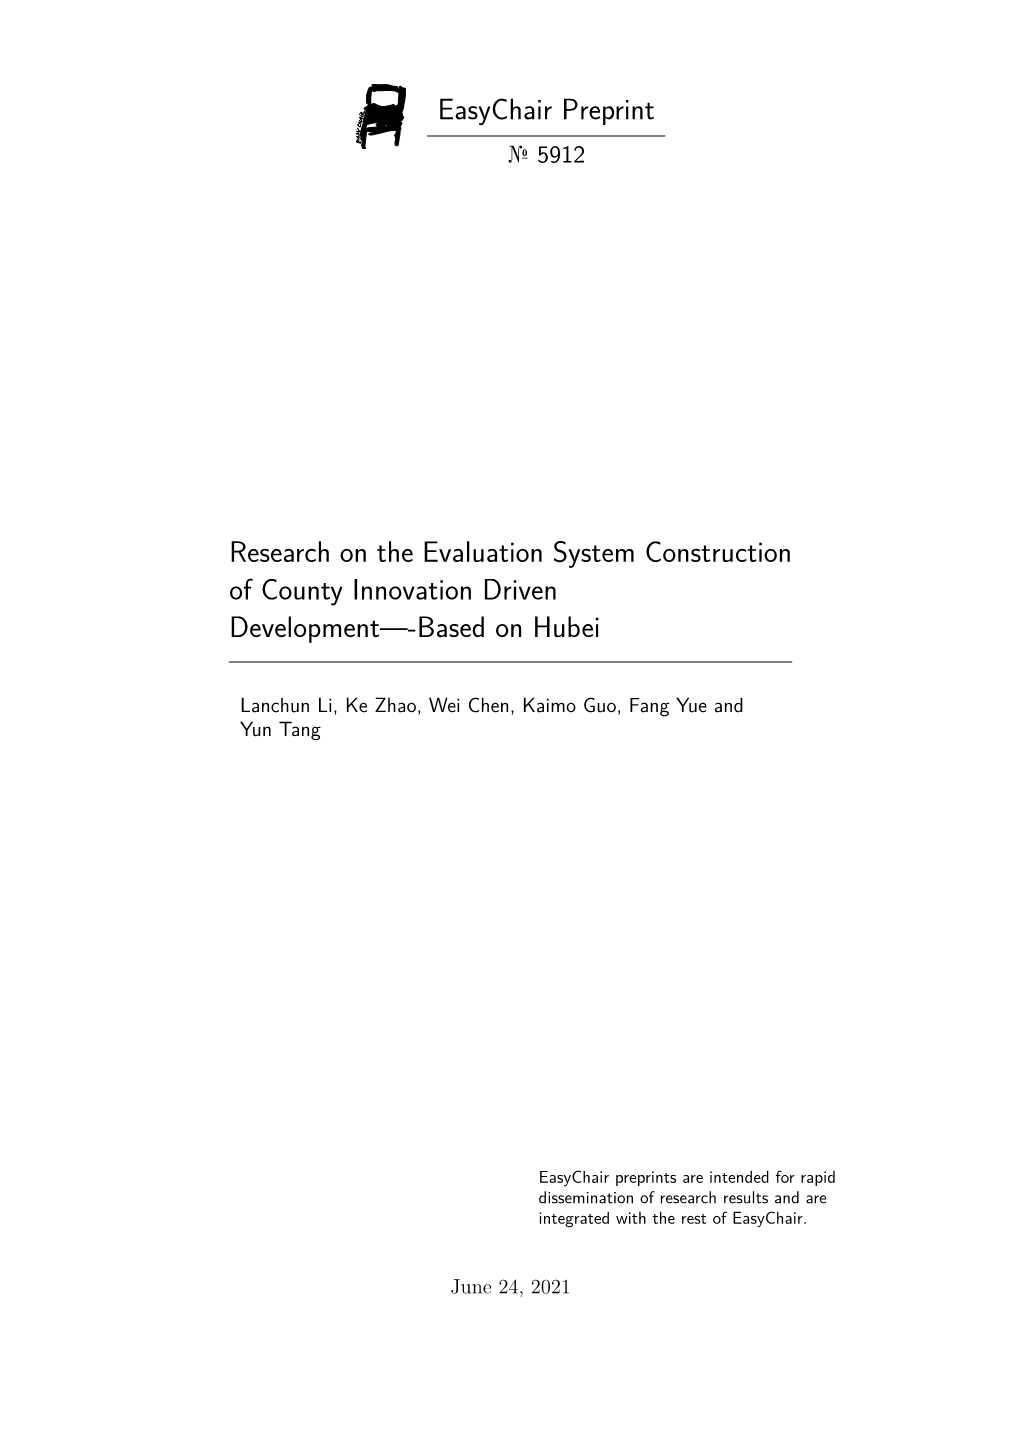 Research on the Evaluation System Construction of County Innovation Driven Development—-Based on Hubei